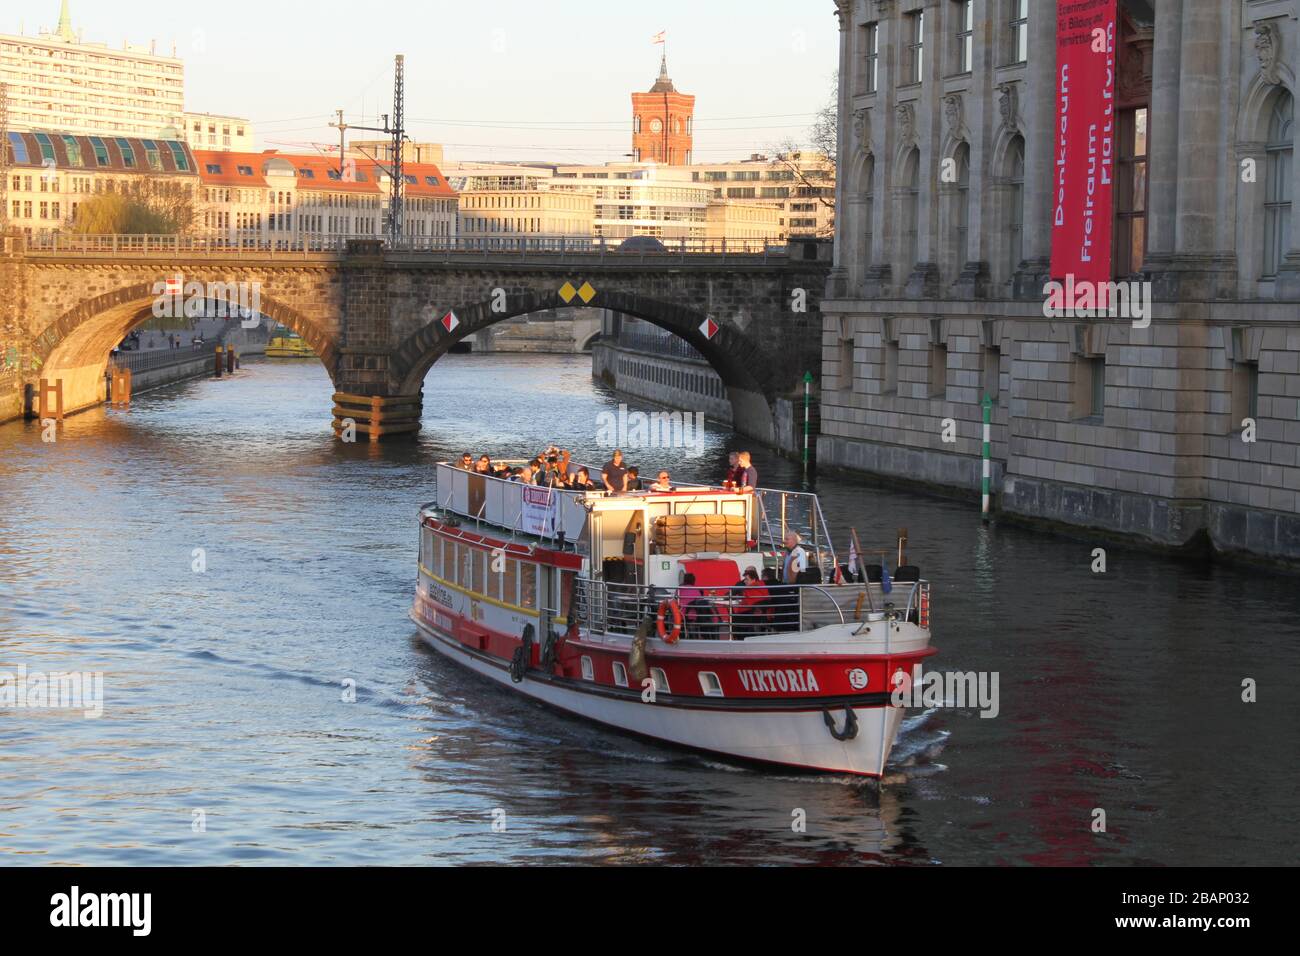 Boat sailing on the river Spree Stock Photo